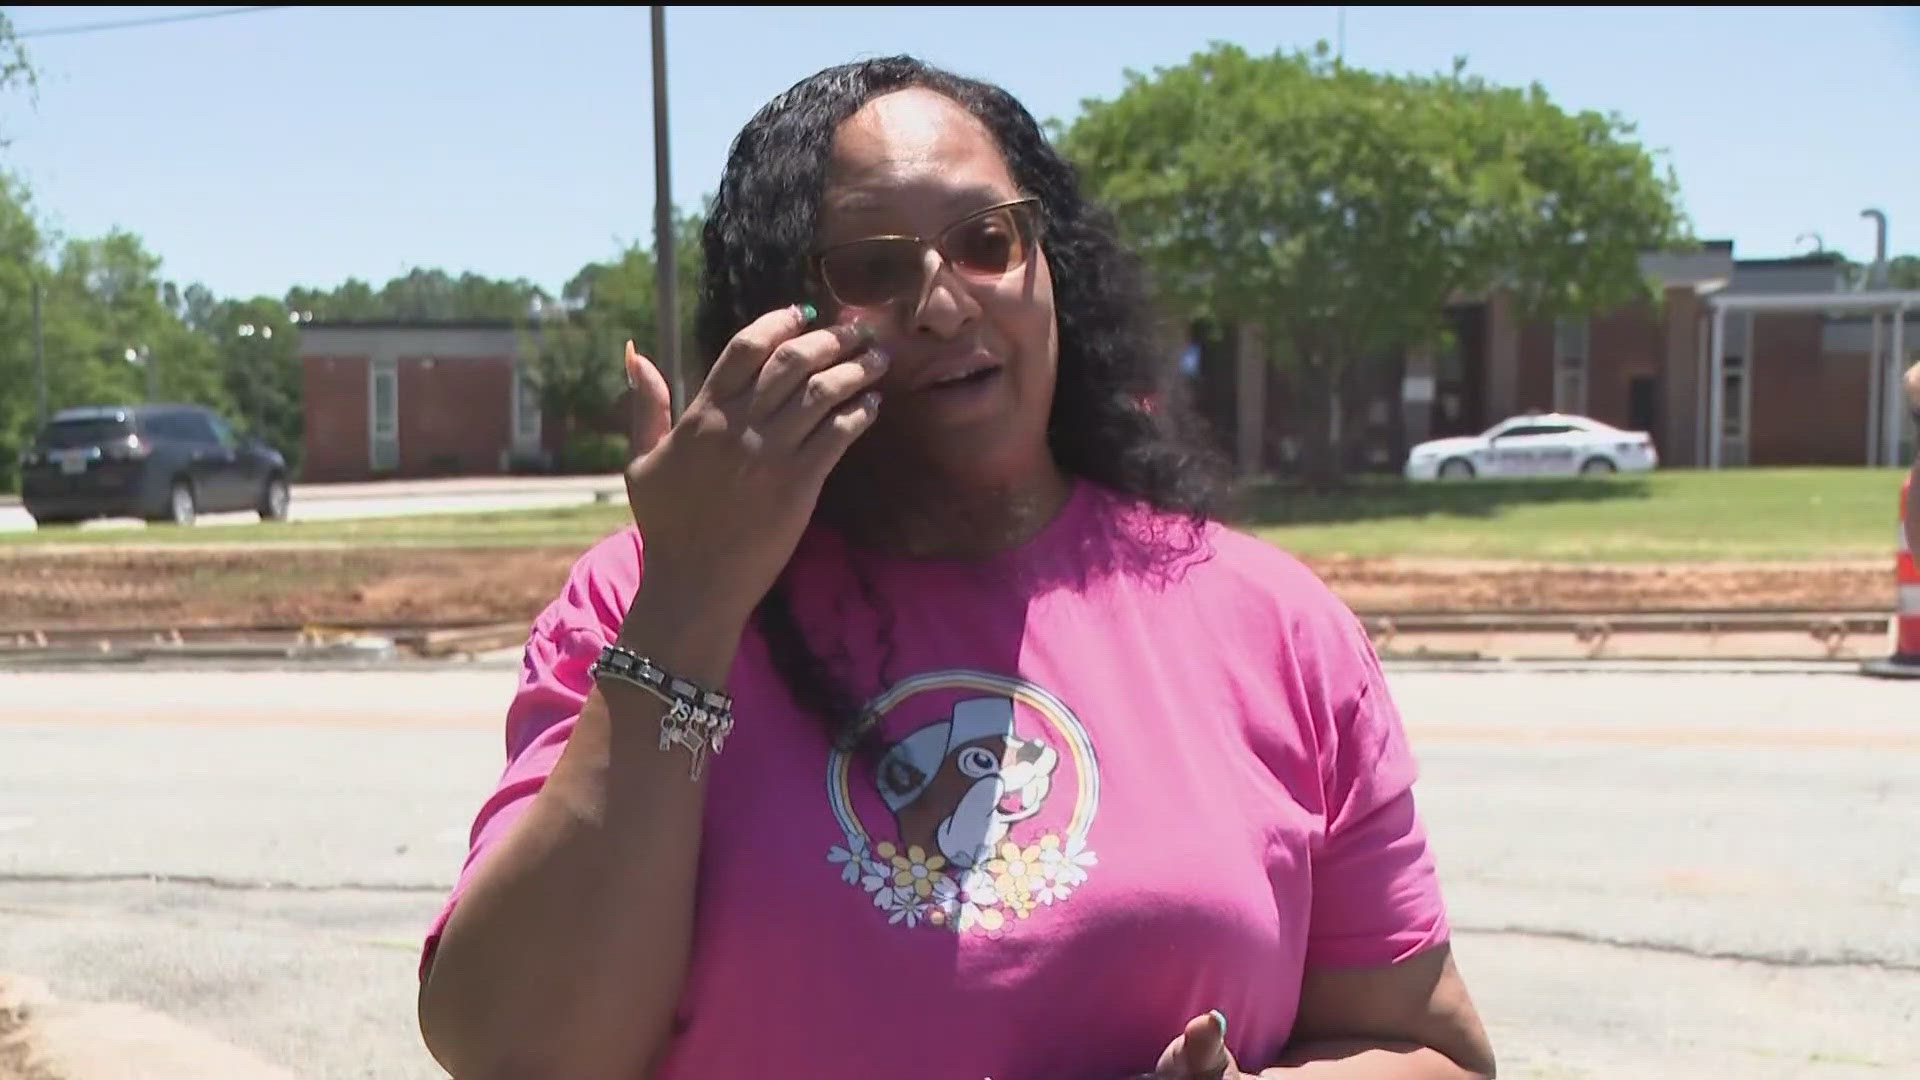 The former assistant principal at the school said she was told her pay would go through July 31 even though the school closure's date is June 30.